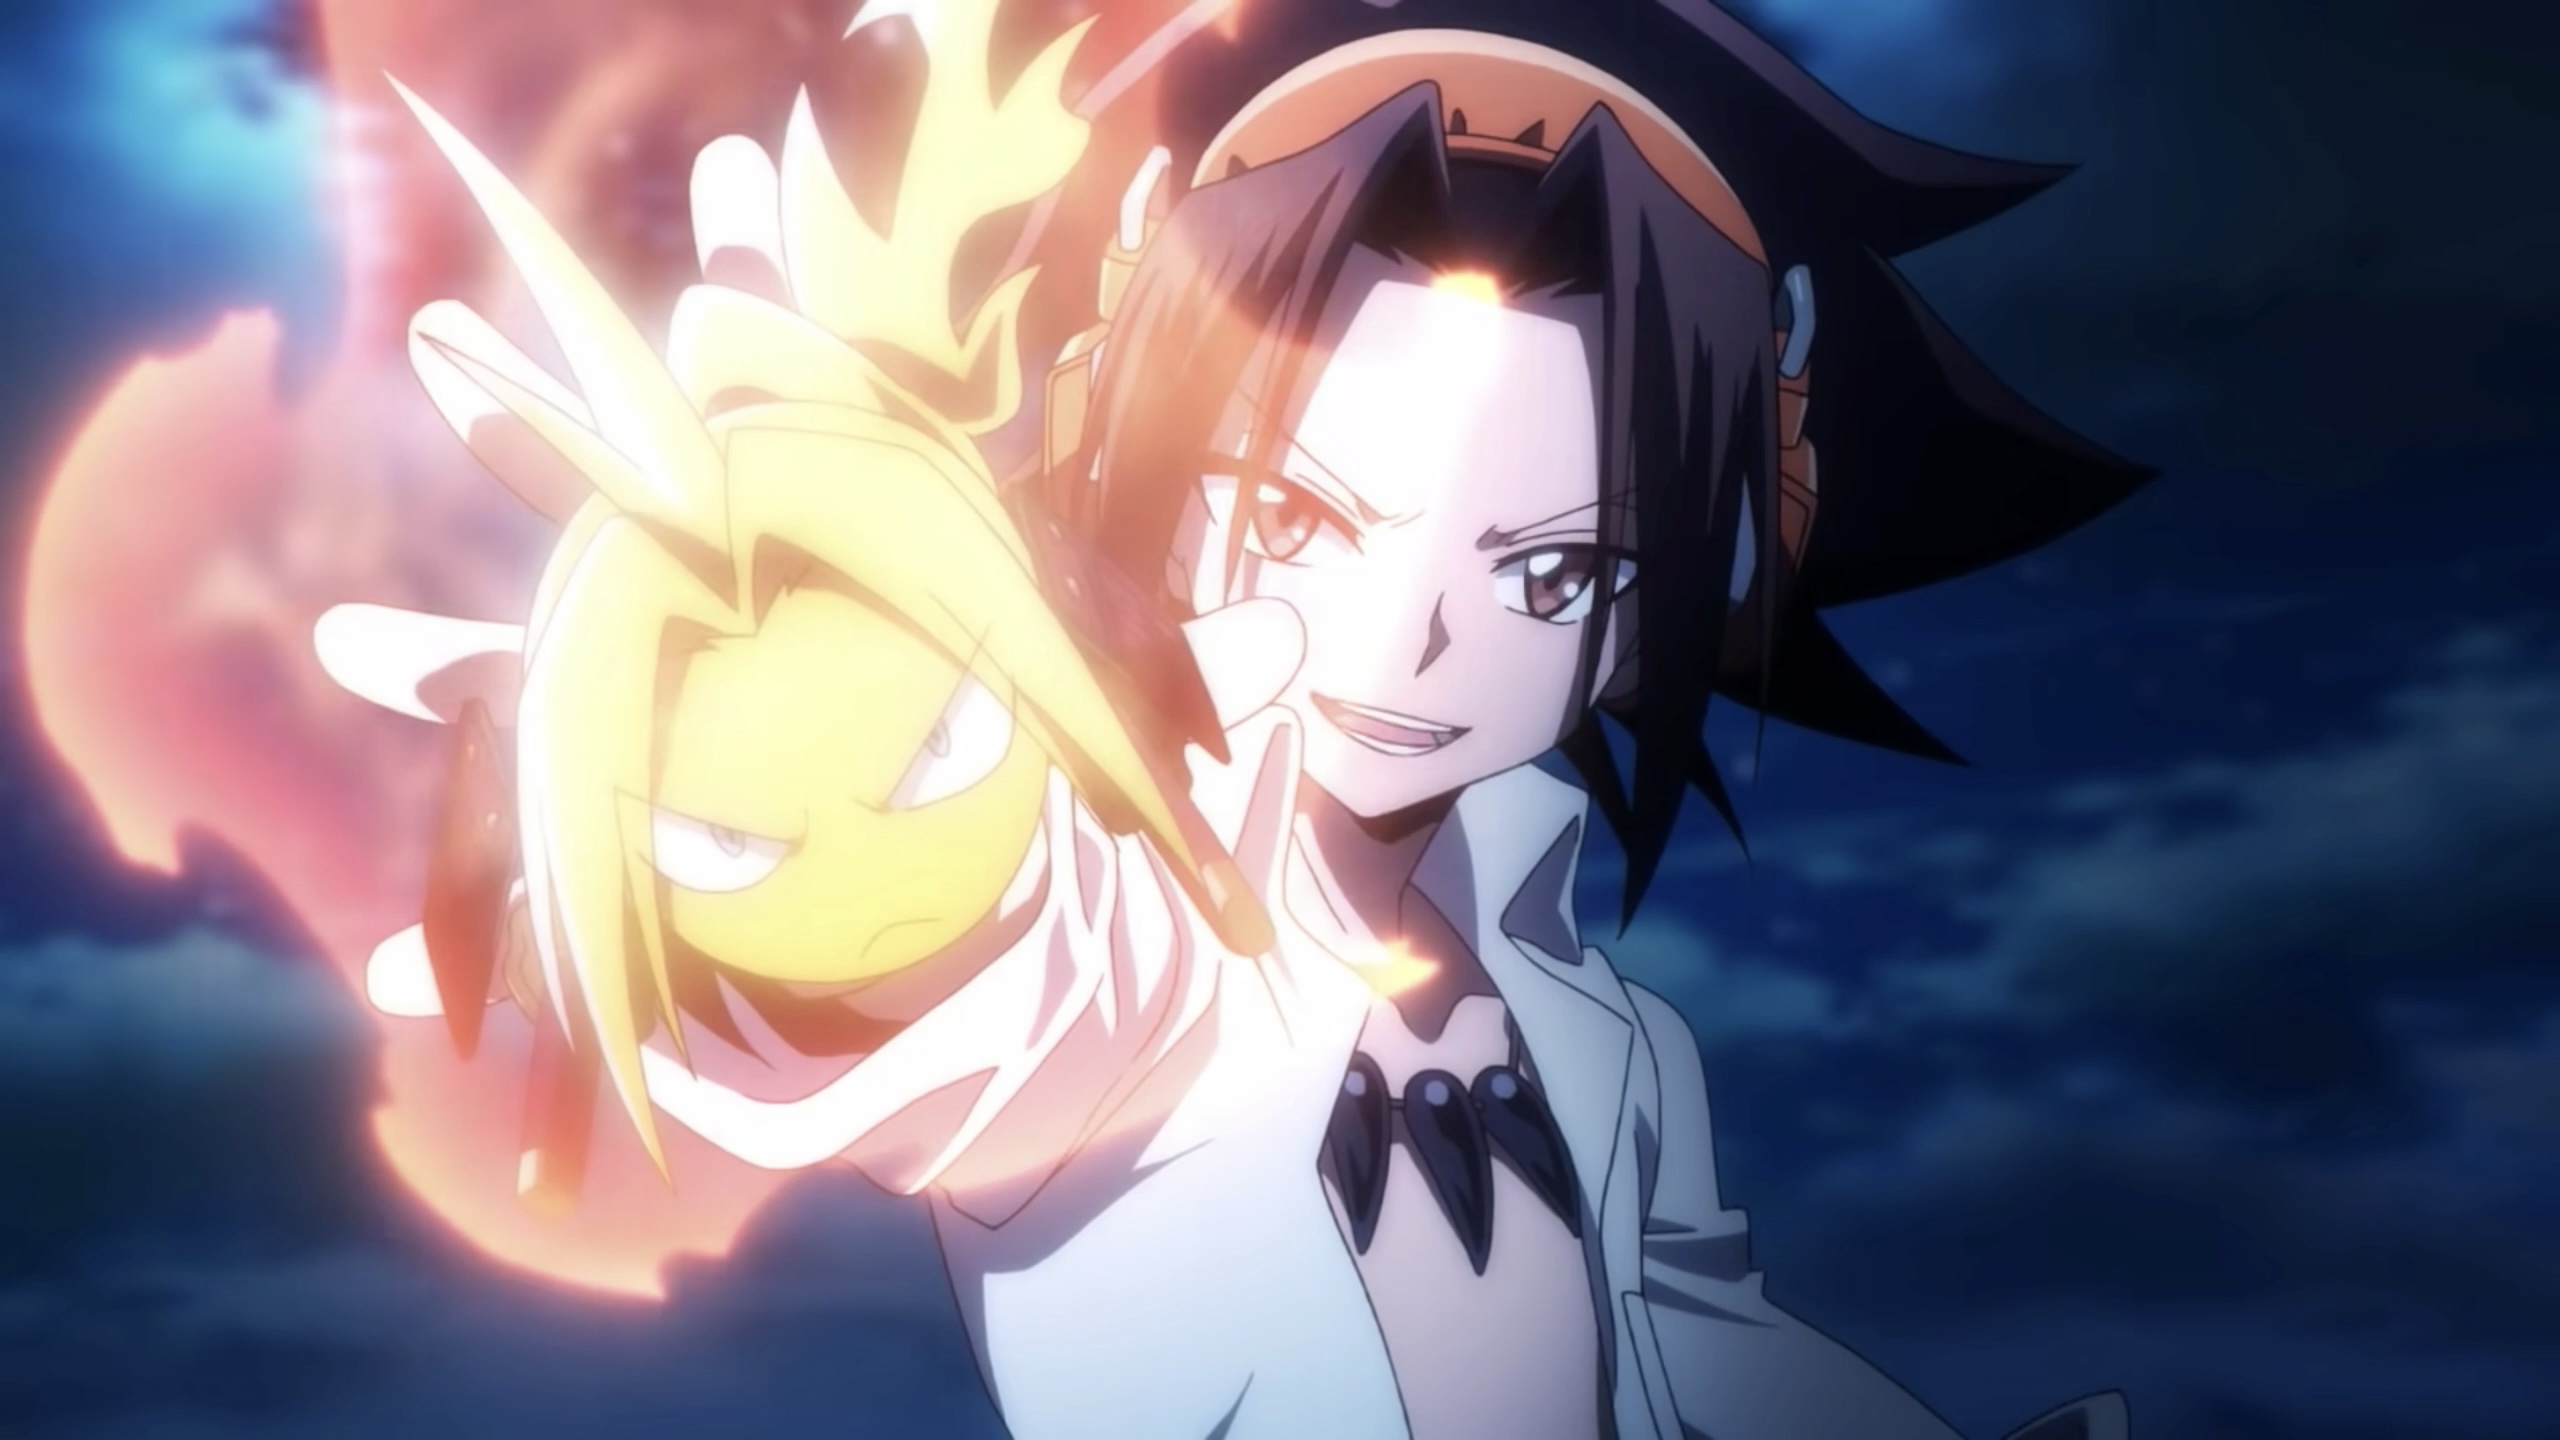 New Cast, Trailer, and Netflix Streaming Announced for Shaman King